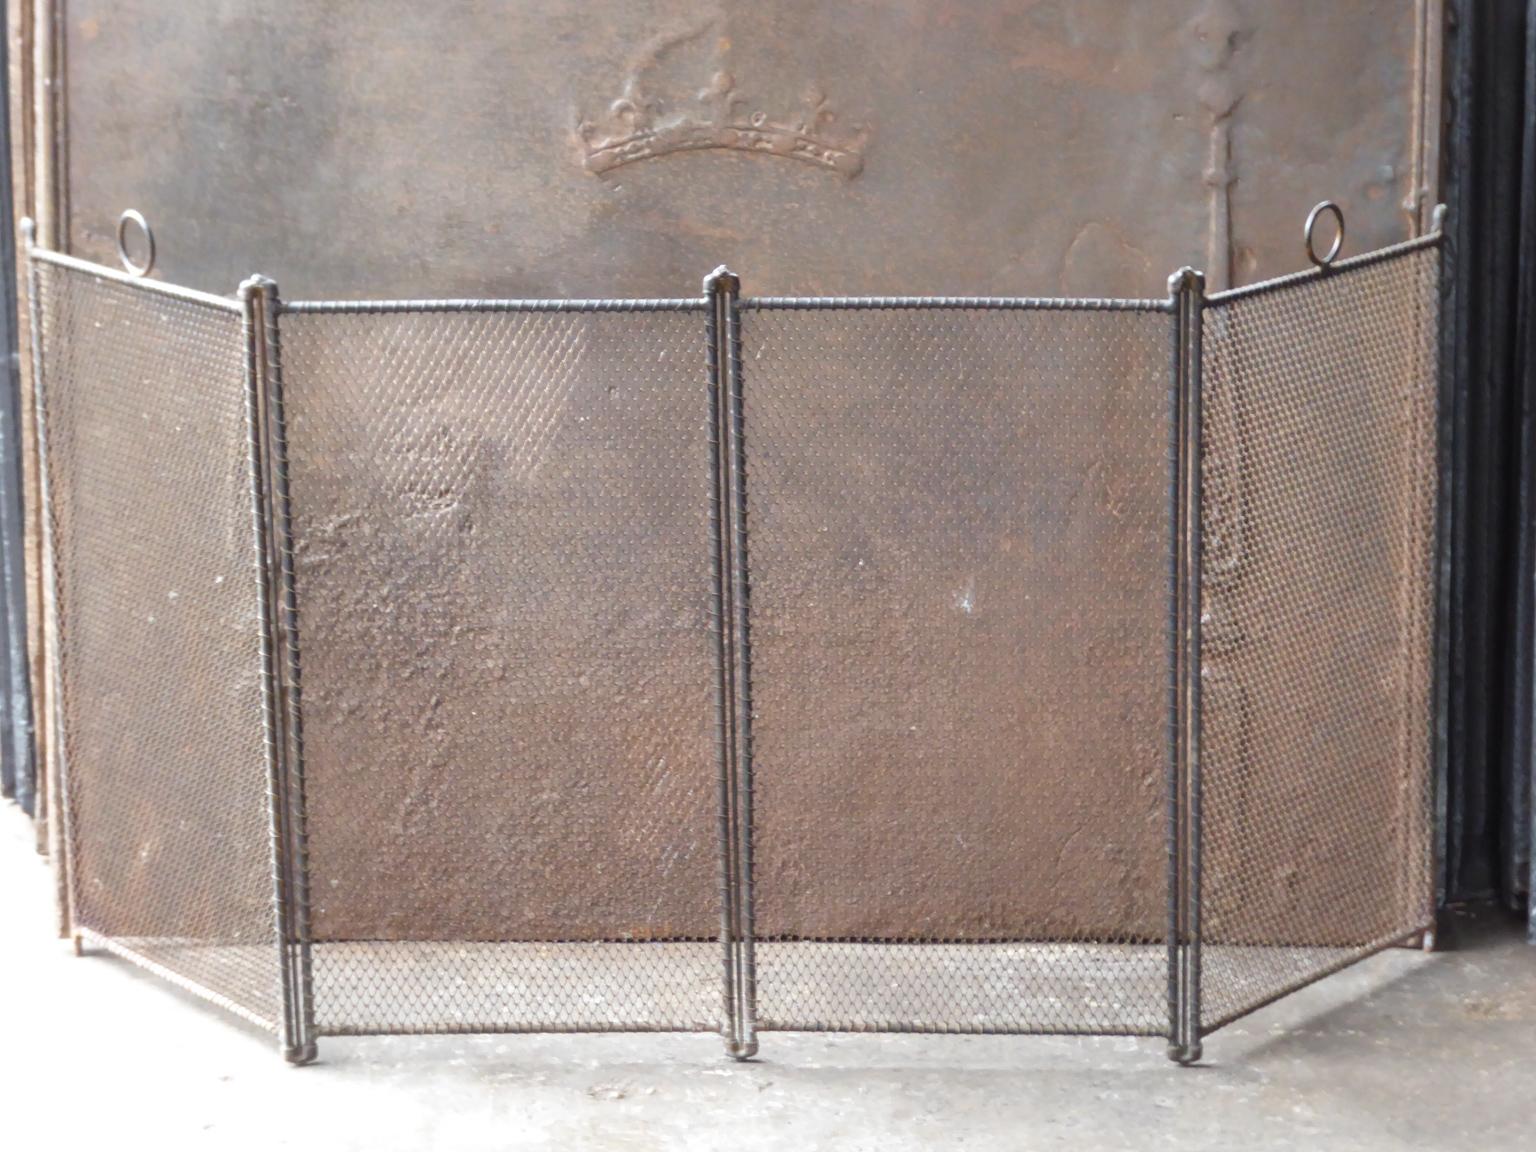 Tall French four-panel fireplace screen. The period is 19th century, Napoleon III. The screen is made of wrought iron and iron mesh. It is in a good condition and is fit for use in front of the fireplace.